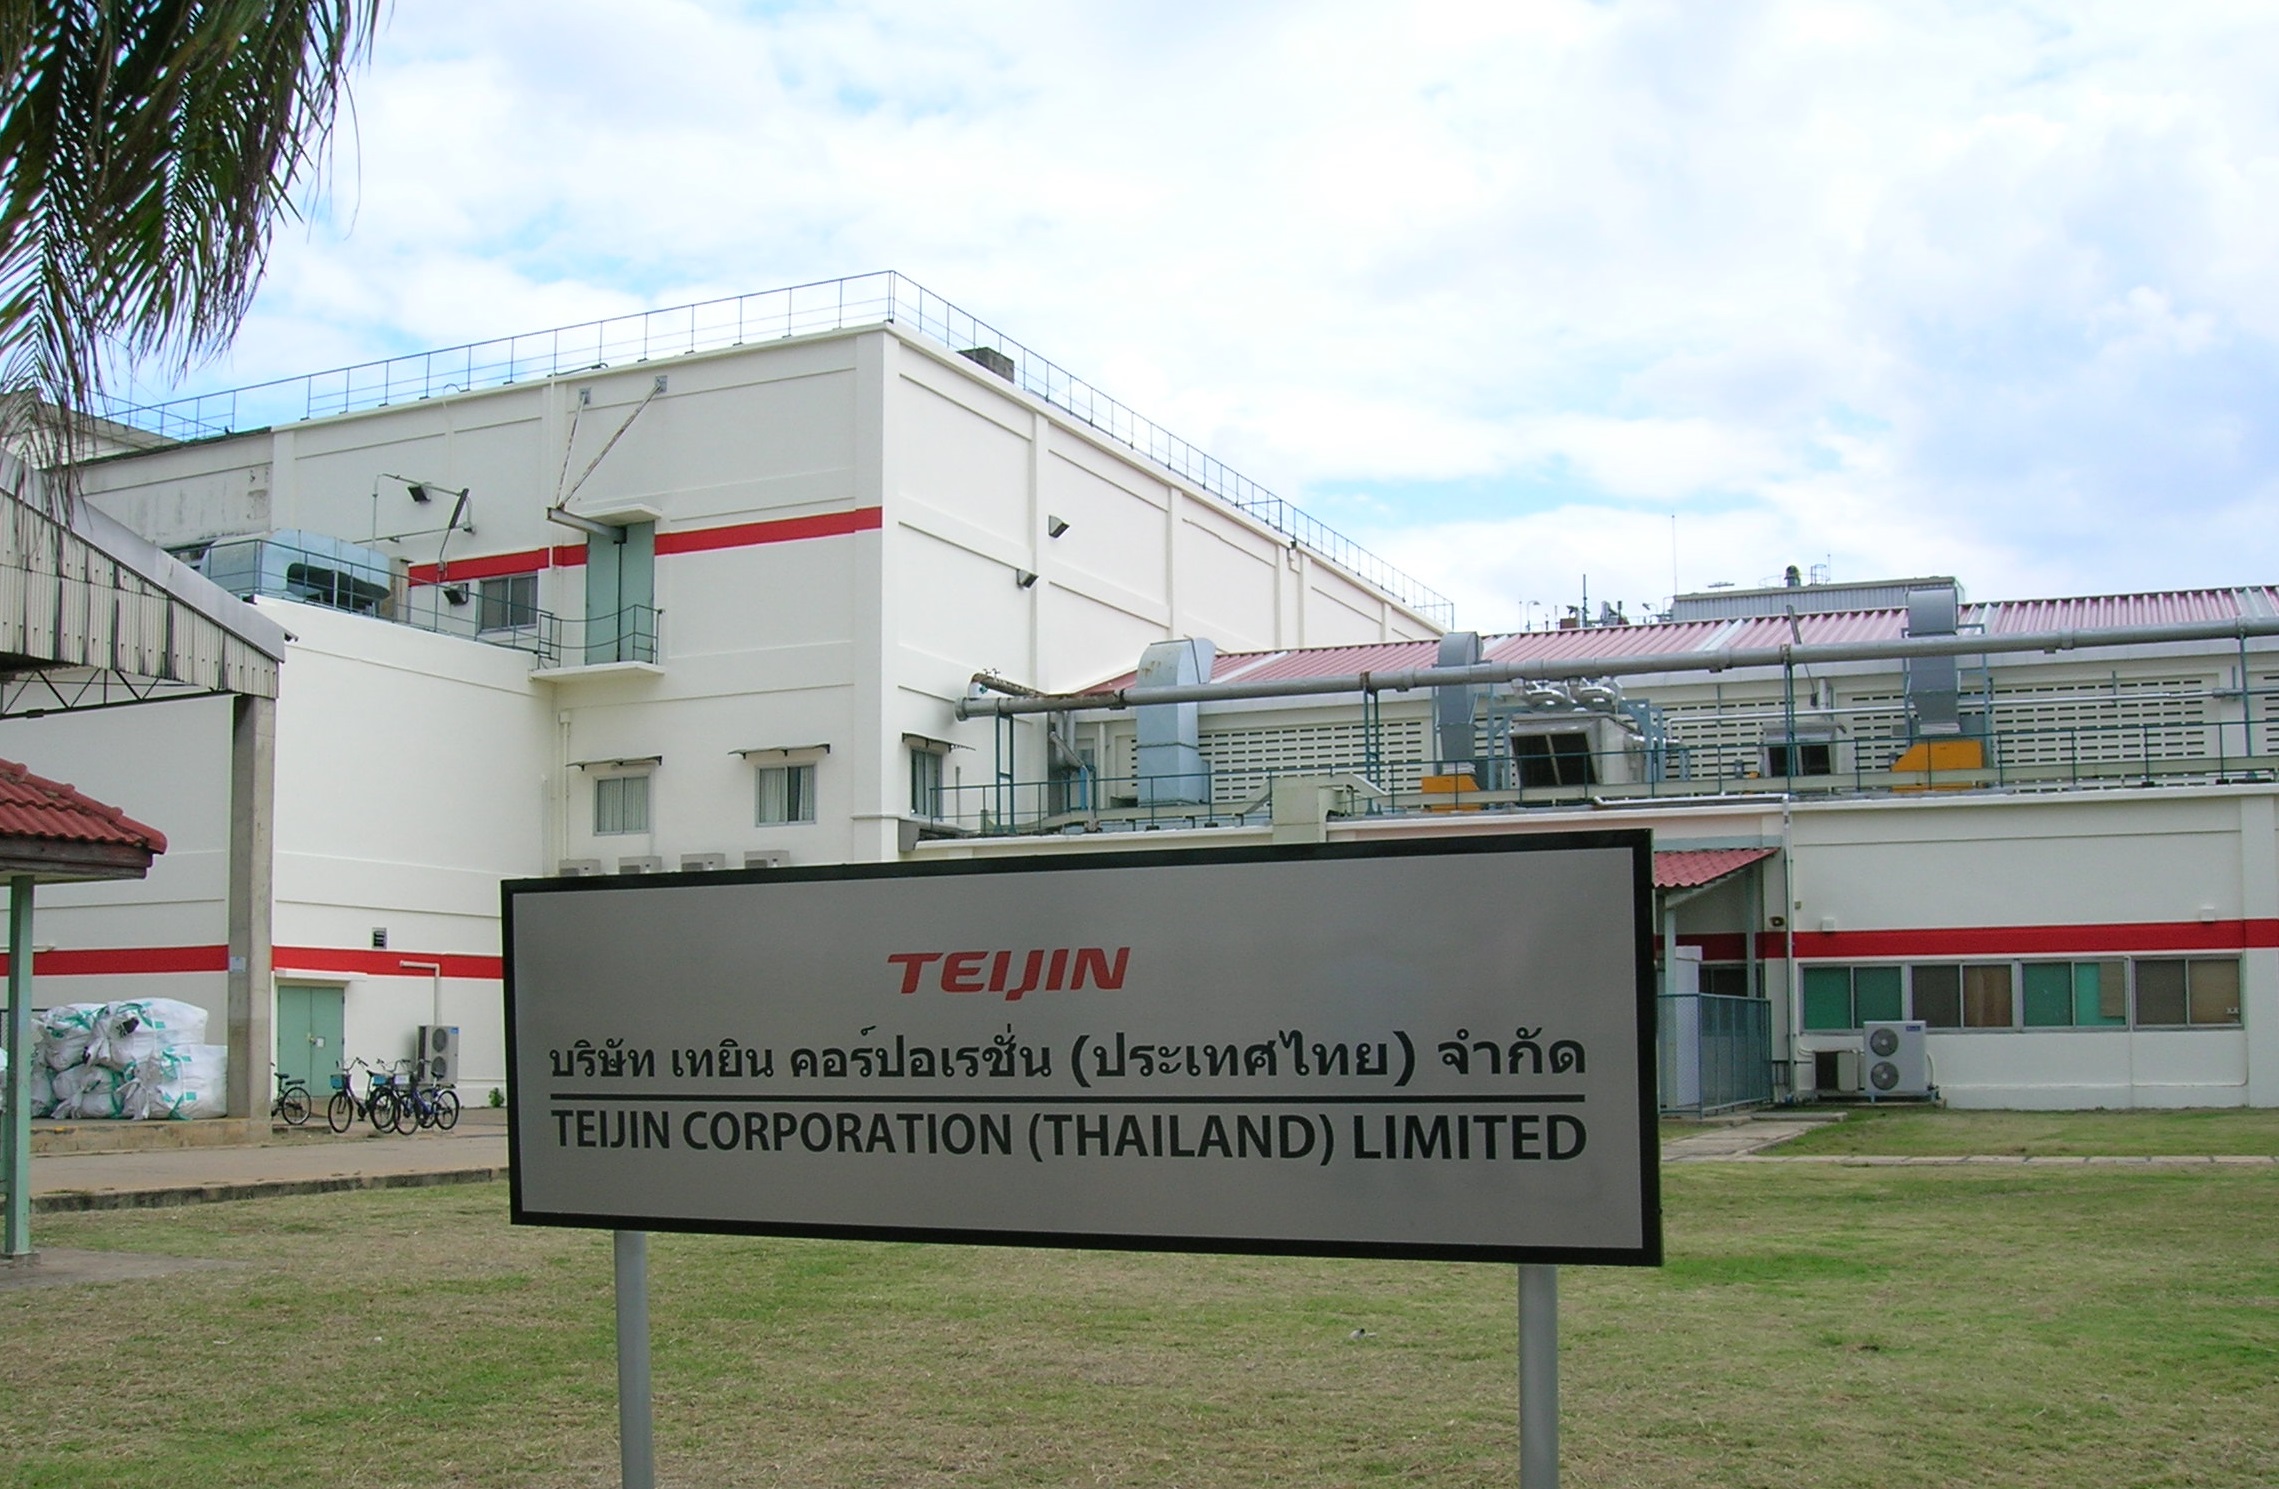 The 2,200-tons-per-annum plant was built at a cost of around US 36 million. © Teijin 